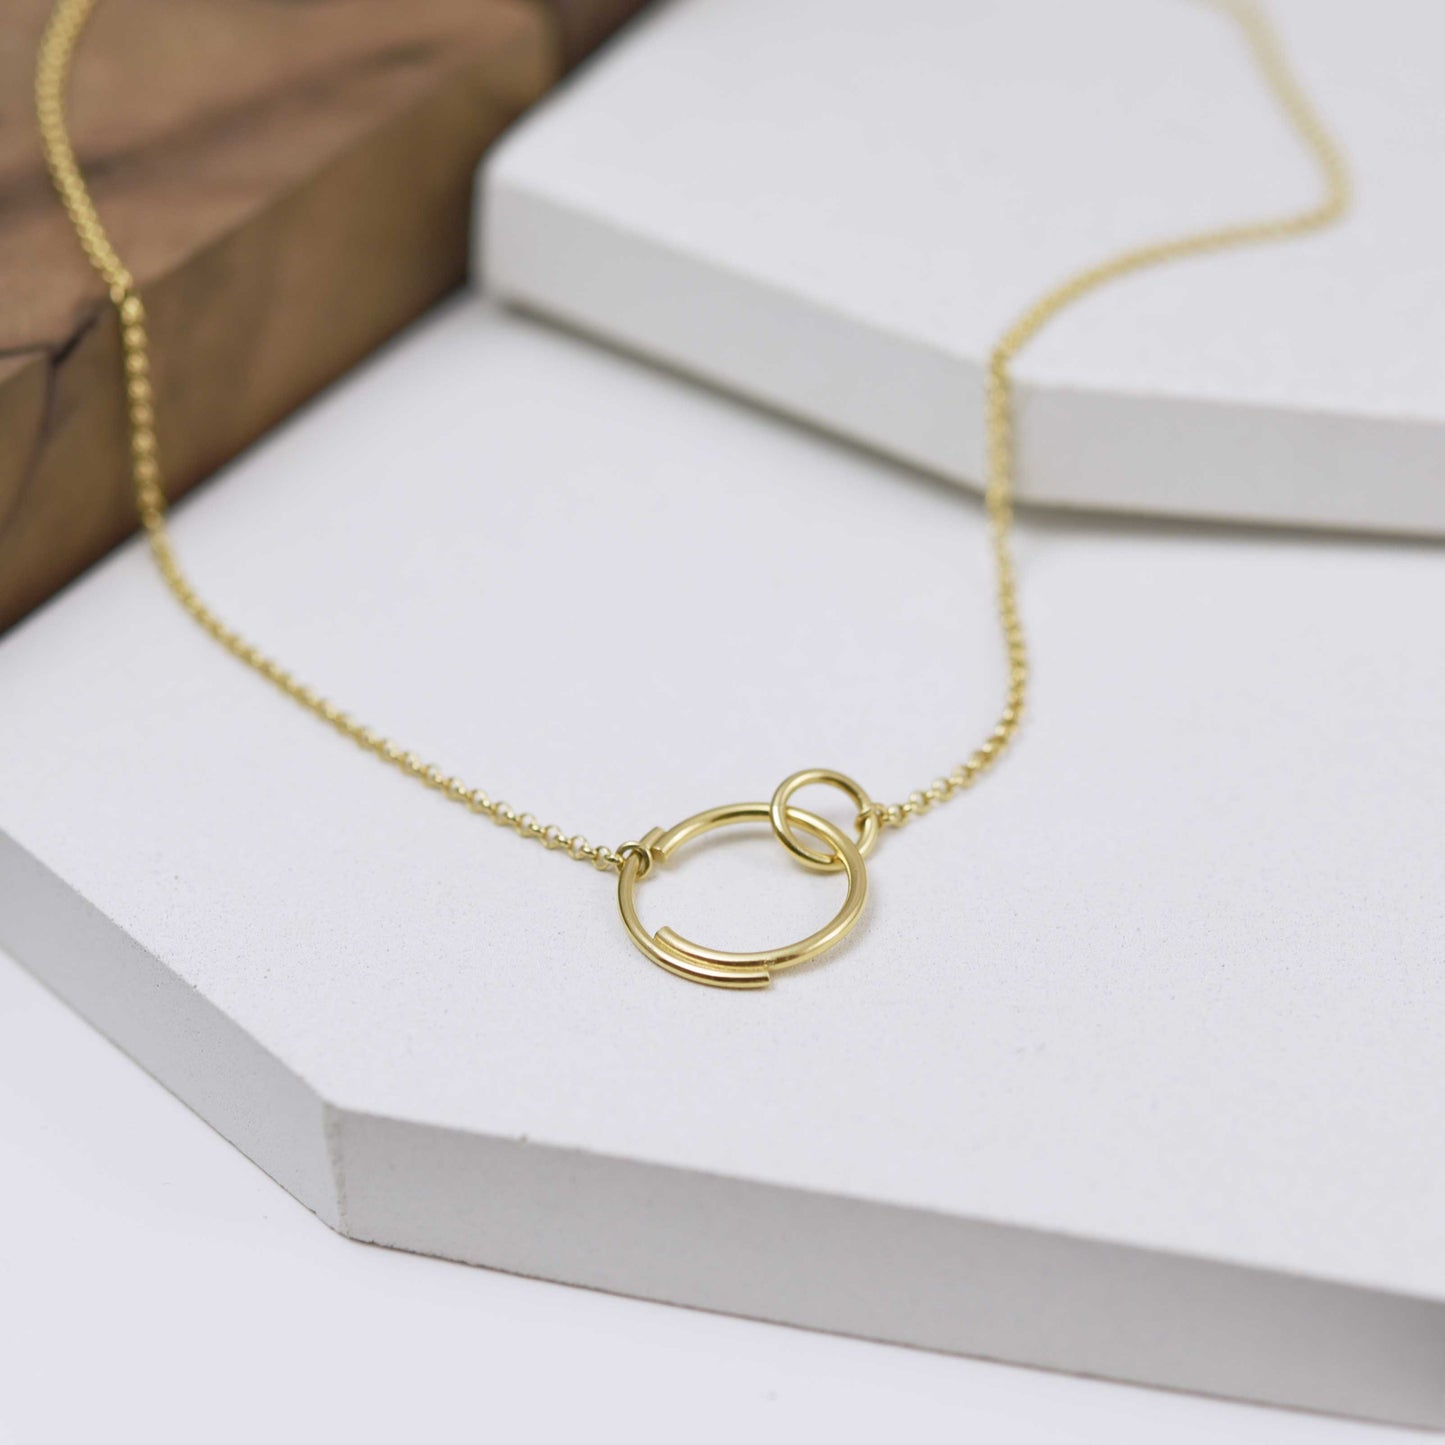 Interlocking Circle Necklace N°6 in gold plated silver